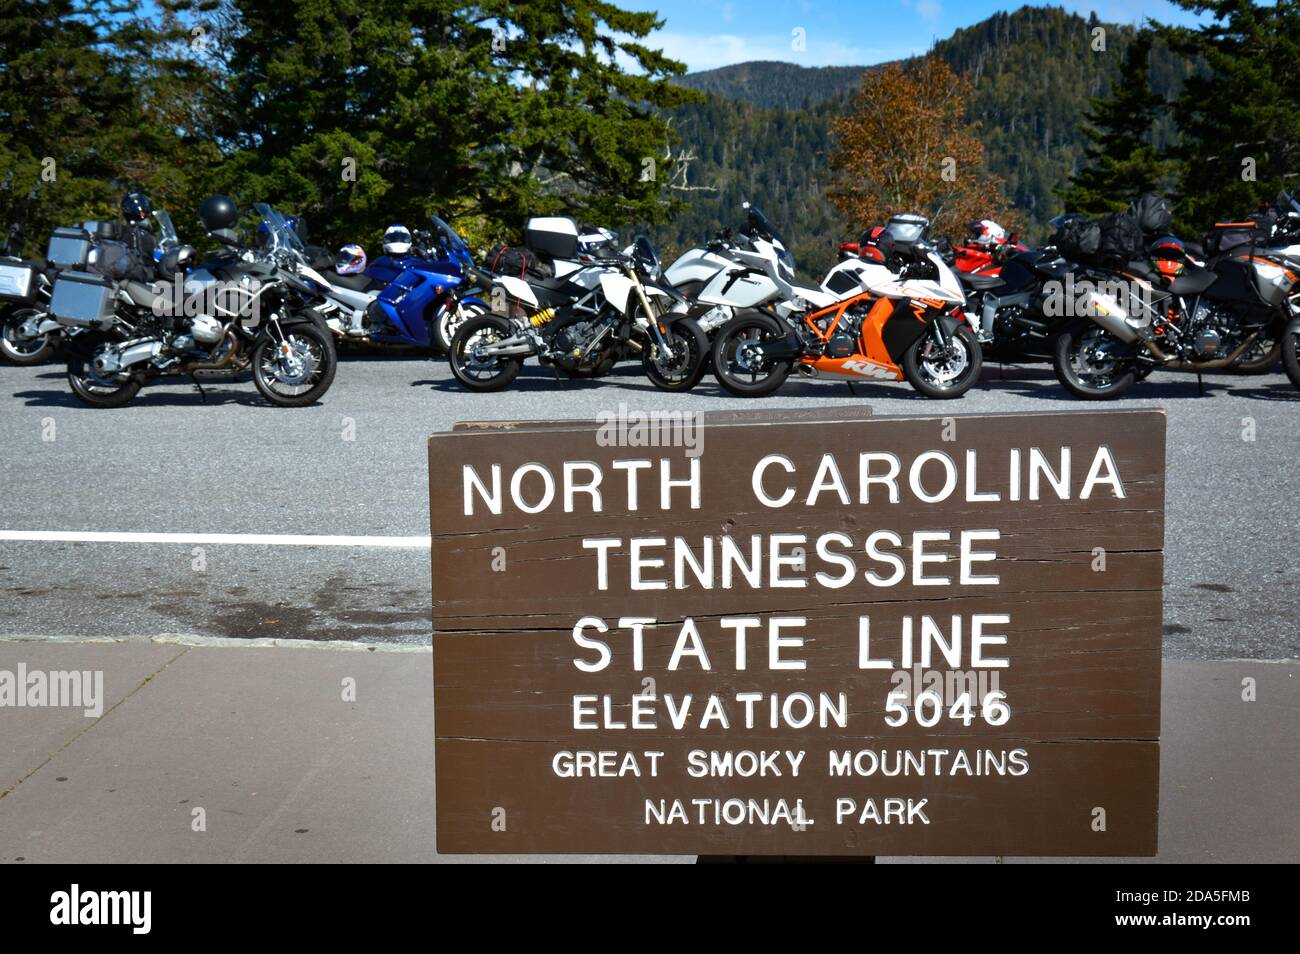 A National Park rustic wooden roadside sign marking the North Carolina and Tennessee State line in the Great Smoky Mountains at an elevation of 5046 f Stock Photo